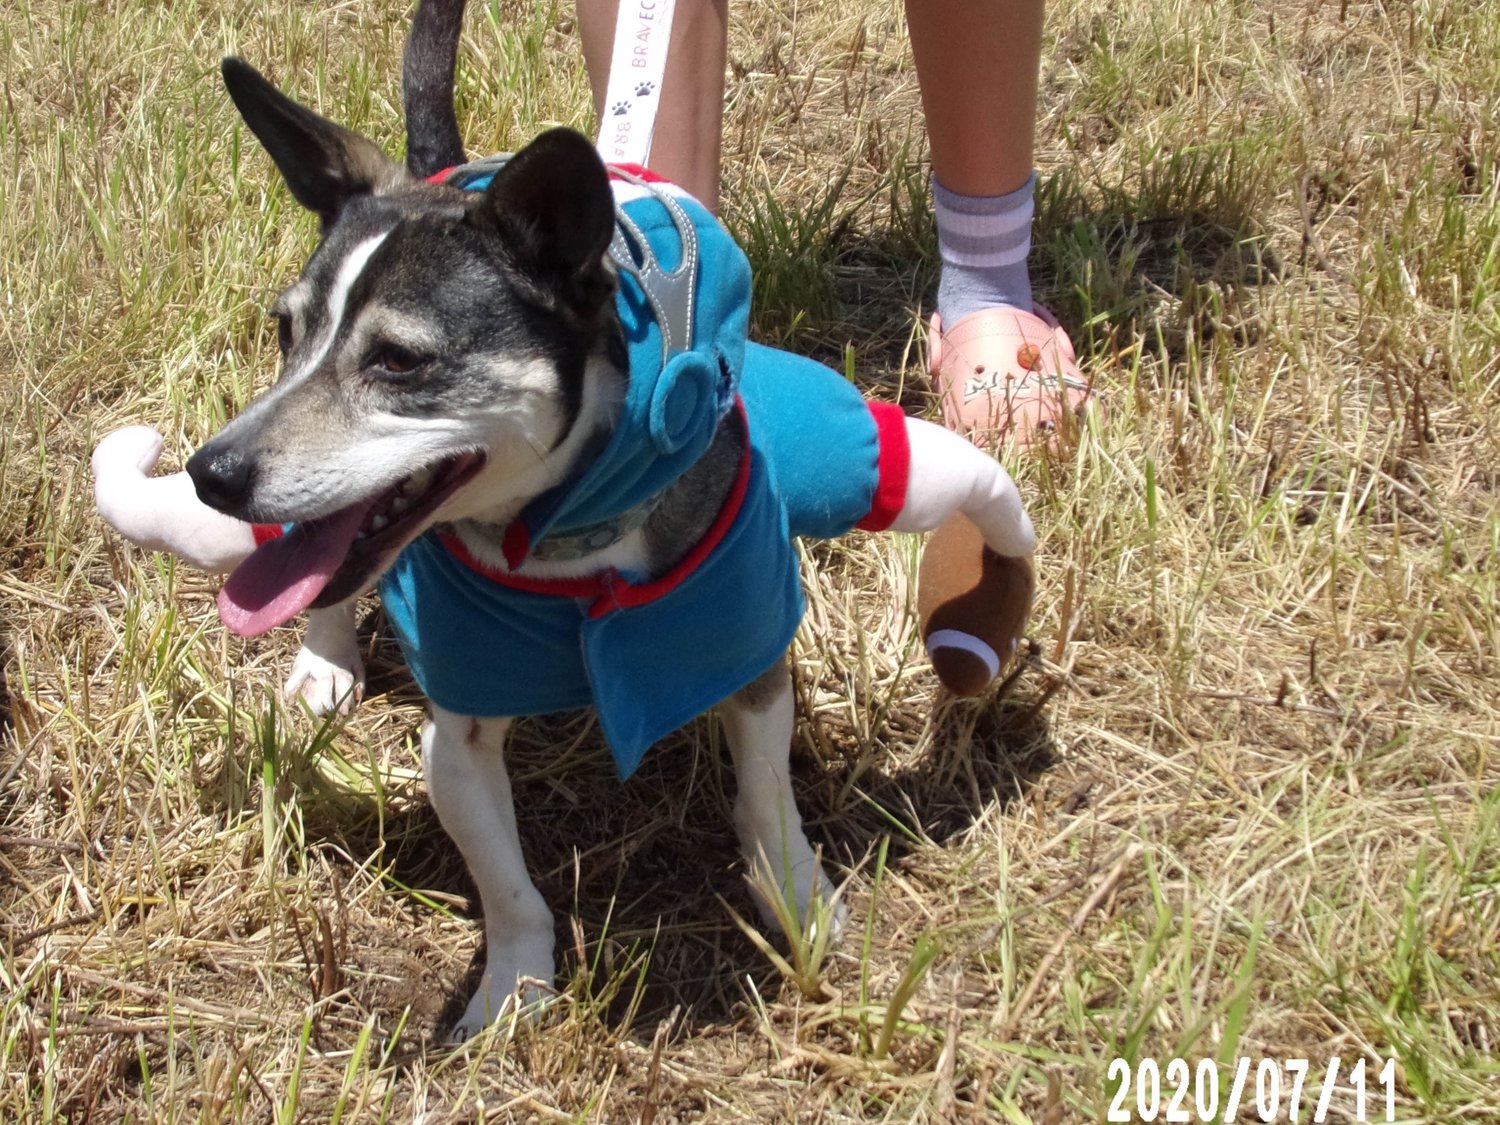 Chico, a 7-8-year-old Rat Terrier mix, won the Best Dressed Category.